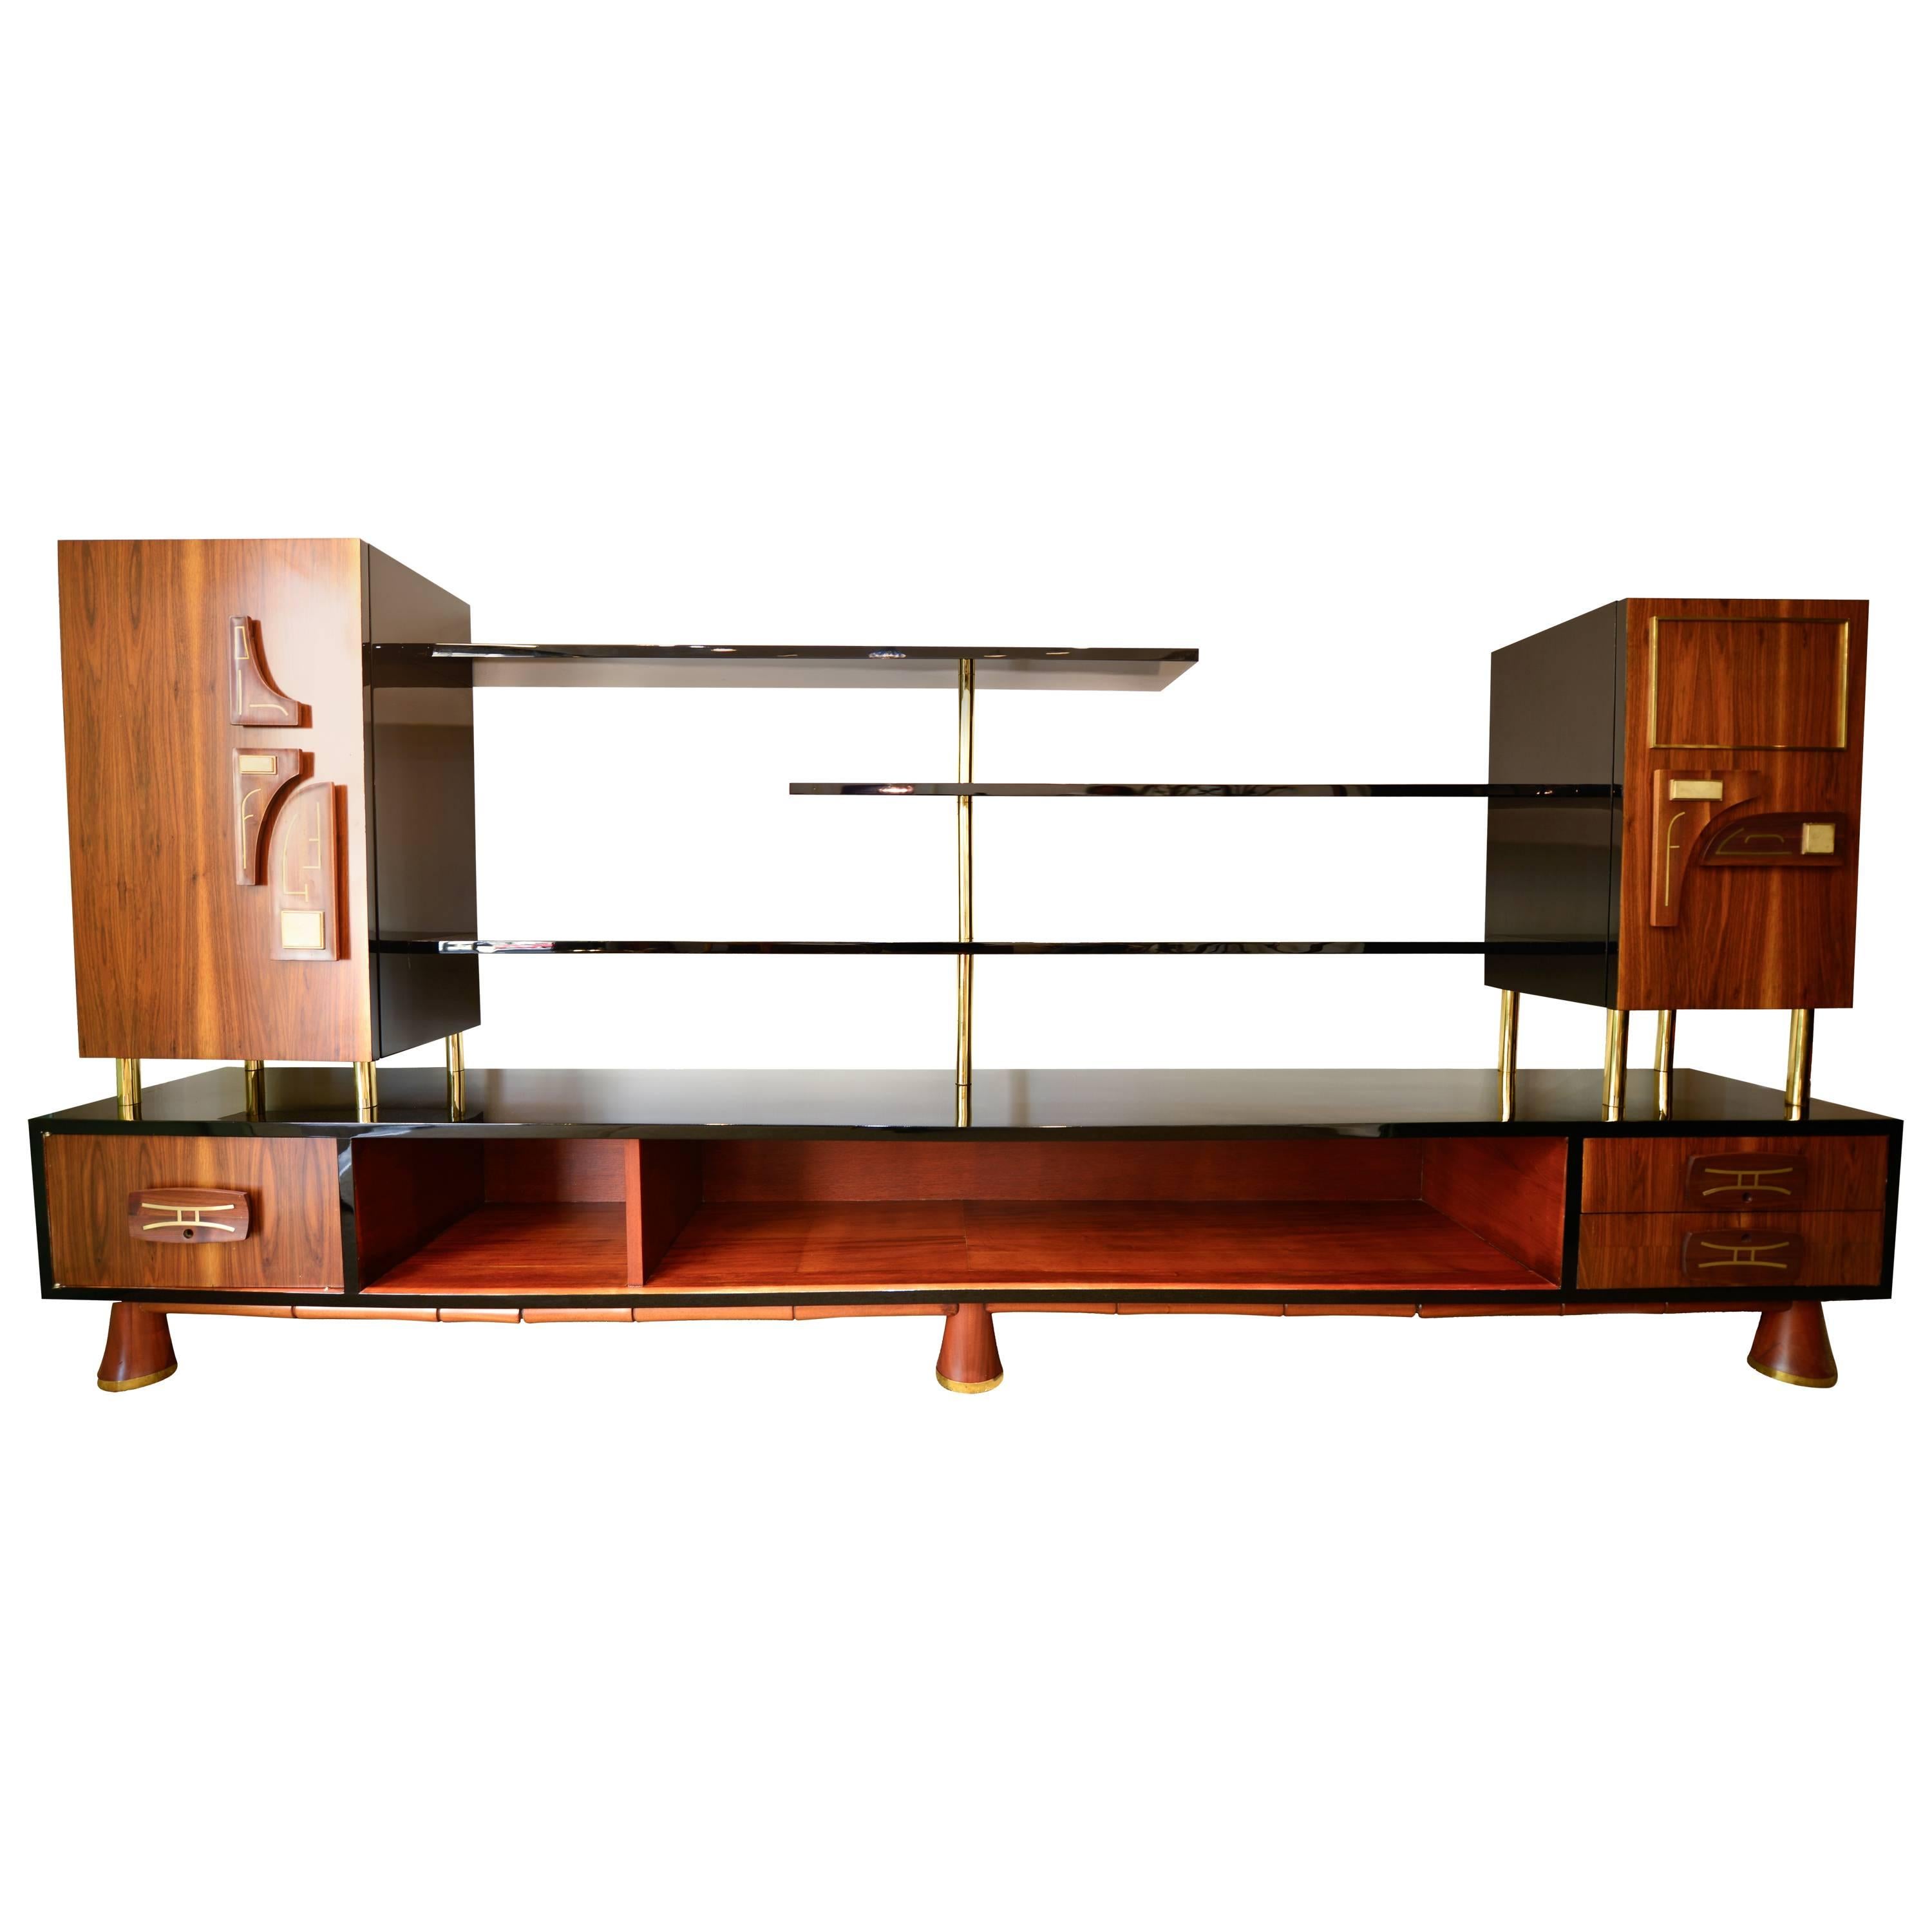 Frank Kyle Wall Unit Bookcase or Dry Bar